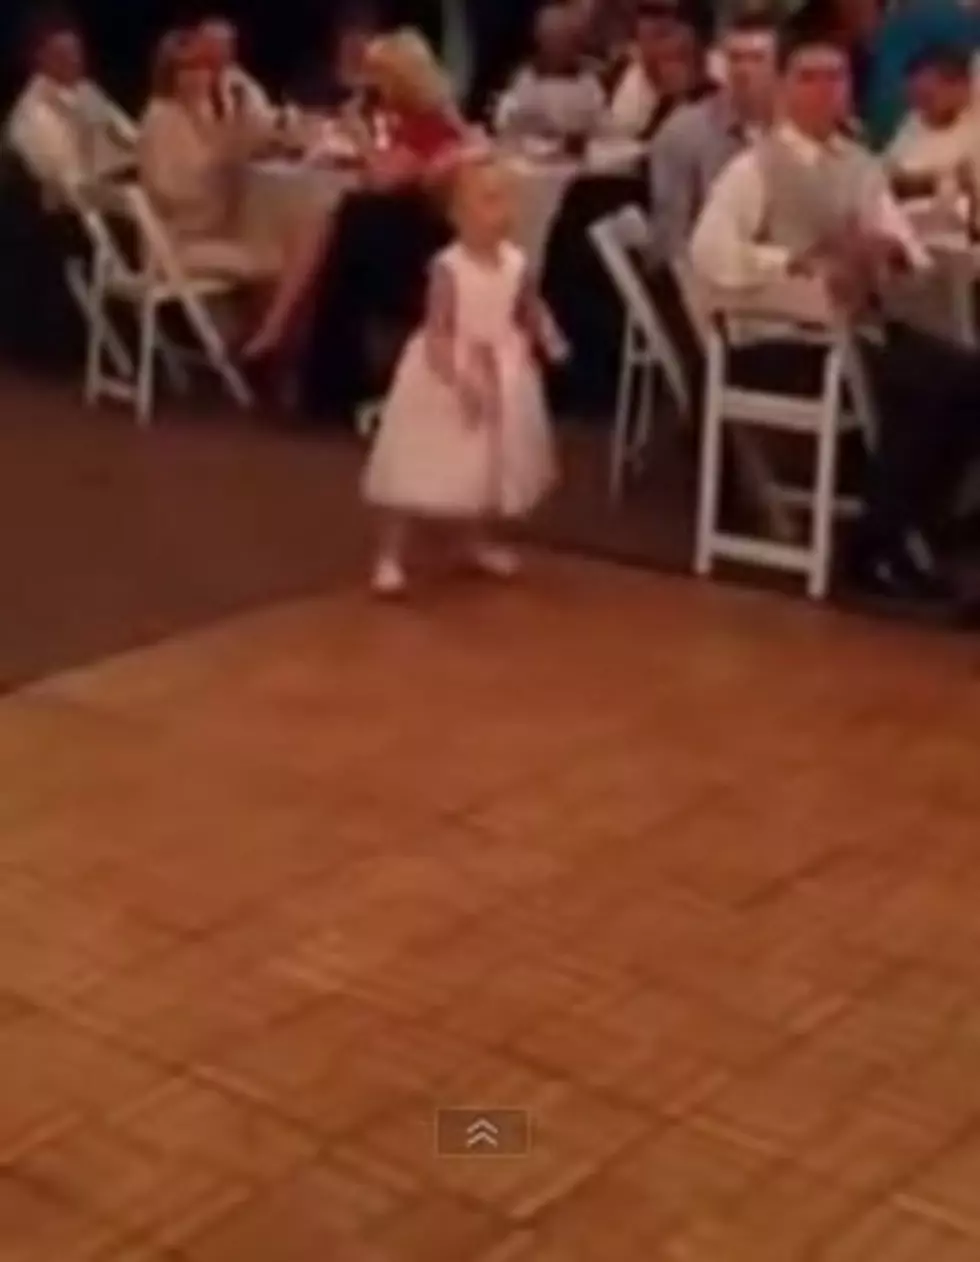 This Little Girl Dancing at a Wedding Drives The Crowd Wild [VIDEO]